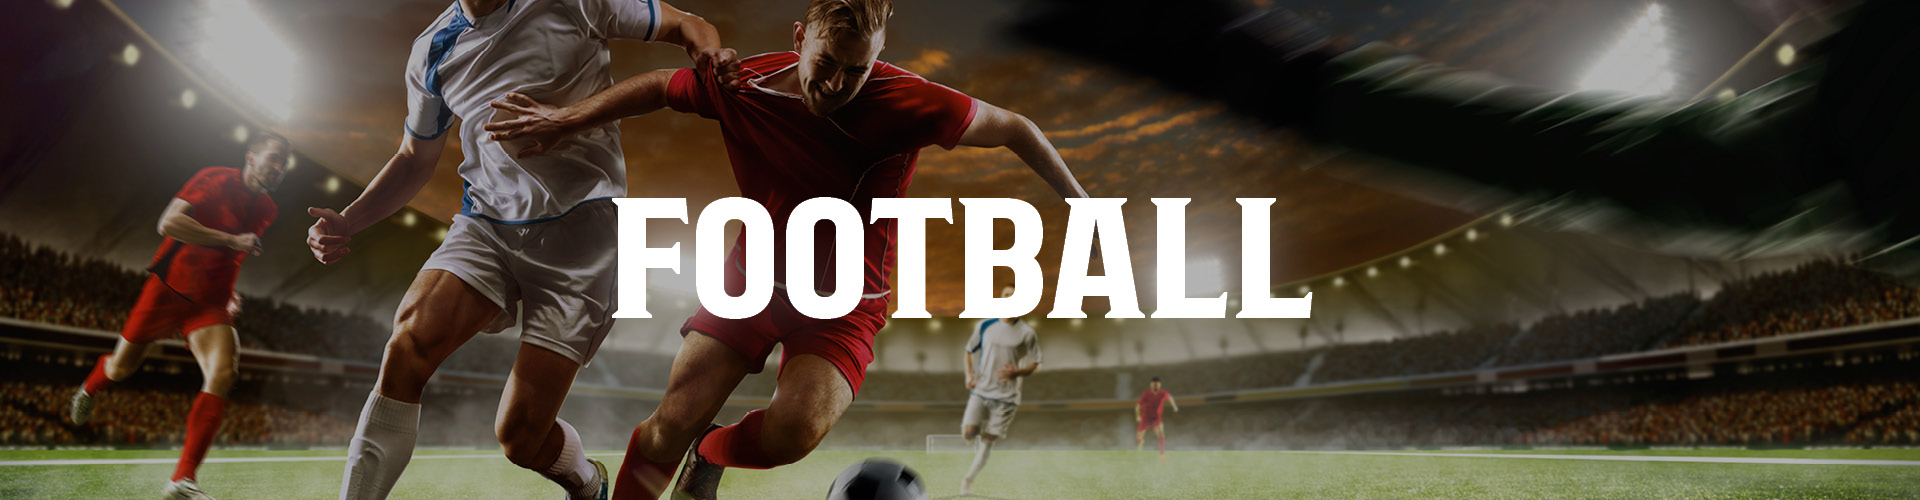 Watch Live Football in Glenfield at The Railway Pub